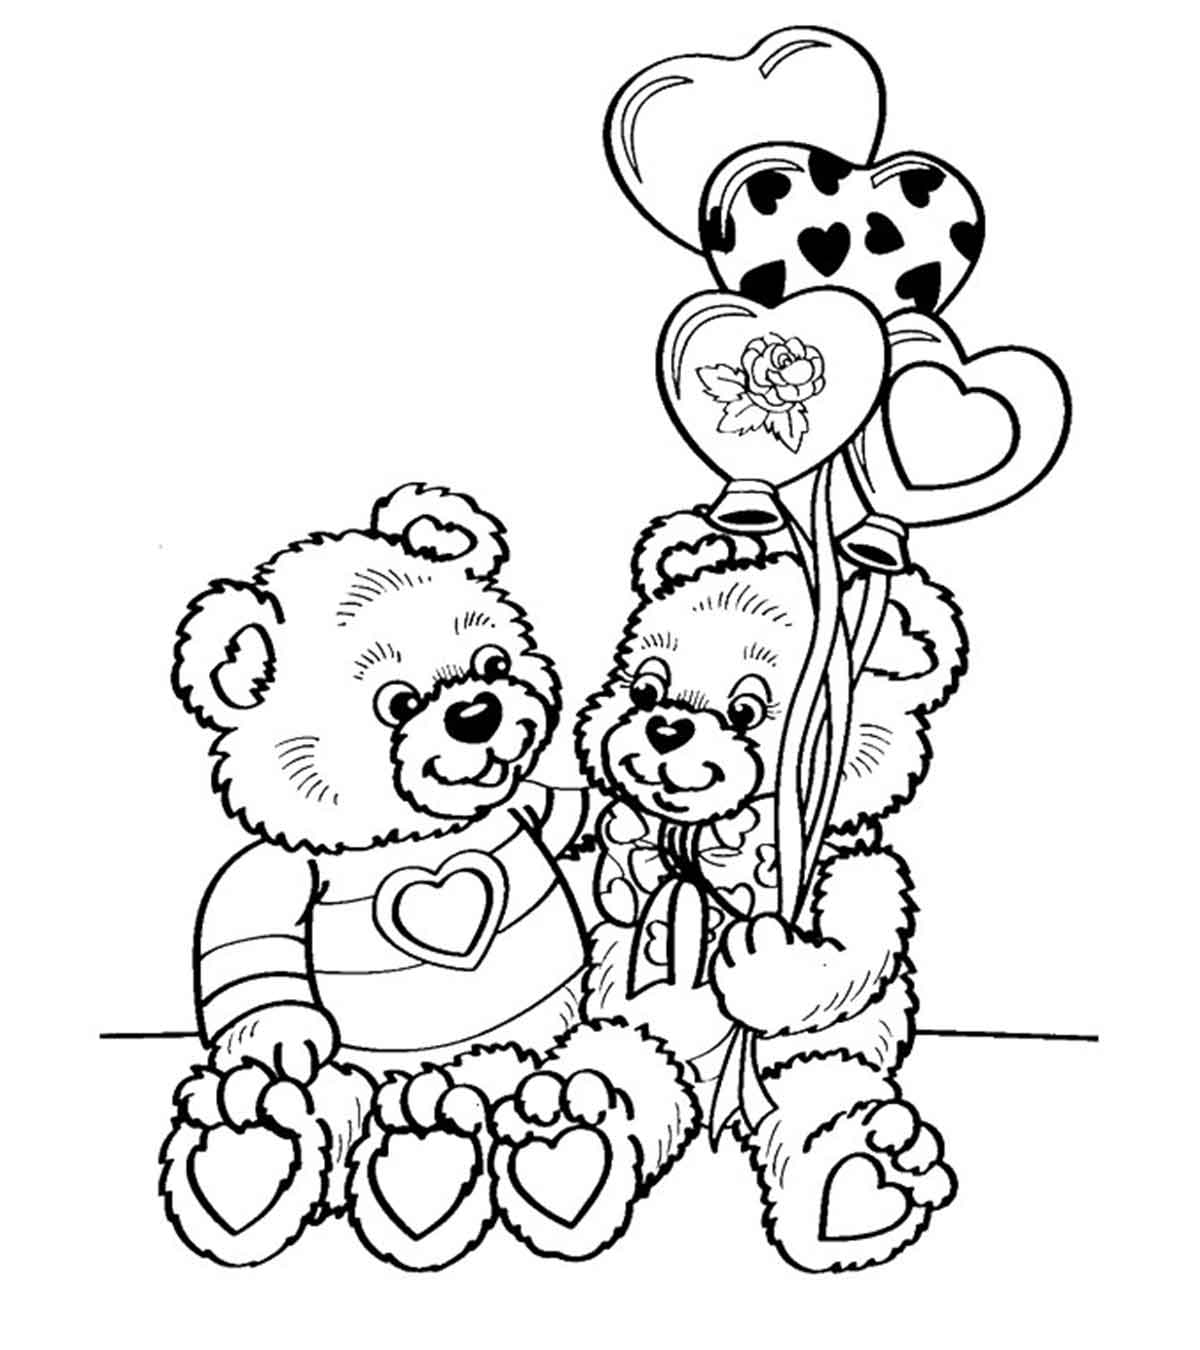 Top 14 Holiday Coloring Pages Your Toddler Will Love To Color